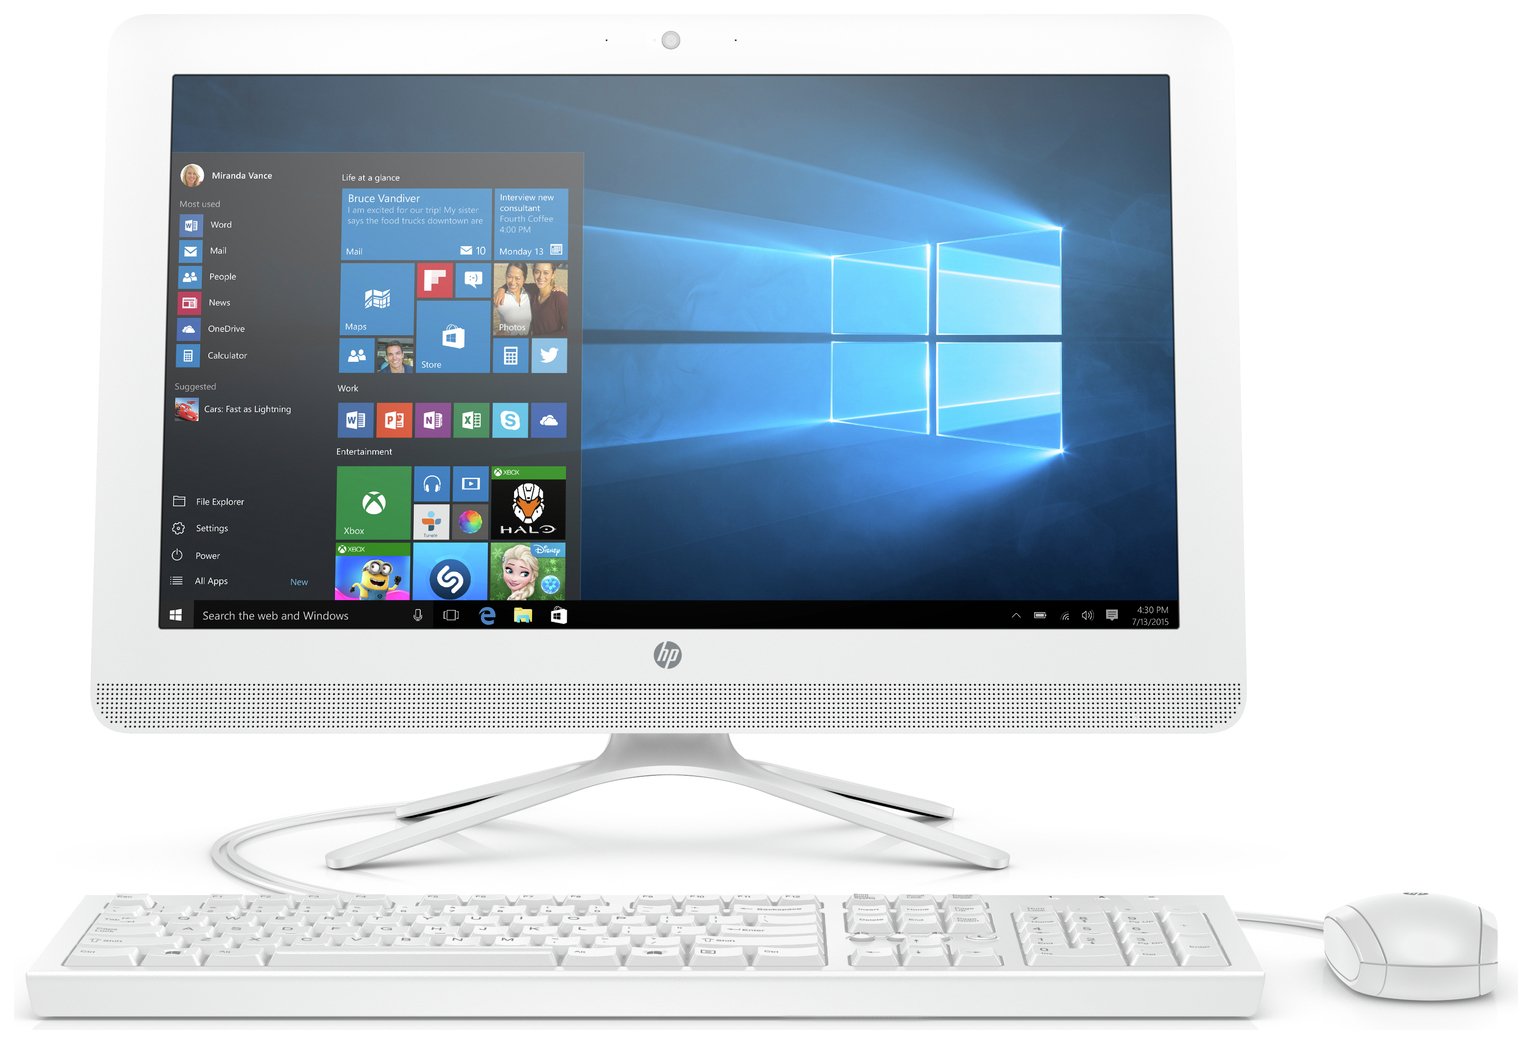 HP 21.5 Inch Celeron 4GB 1TB All-in-One PC - White